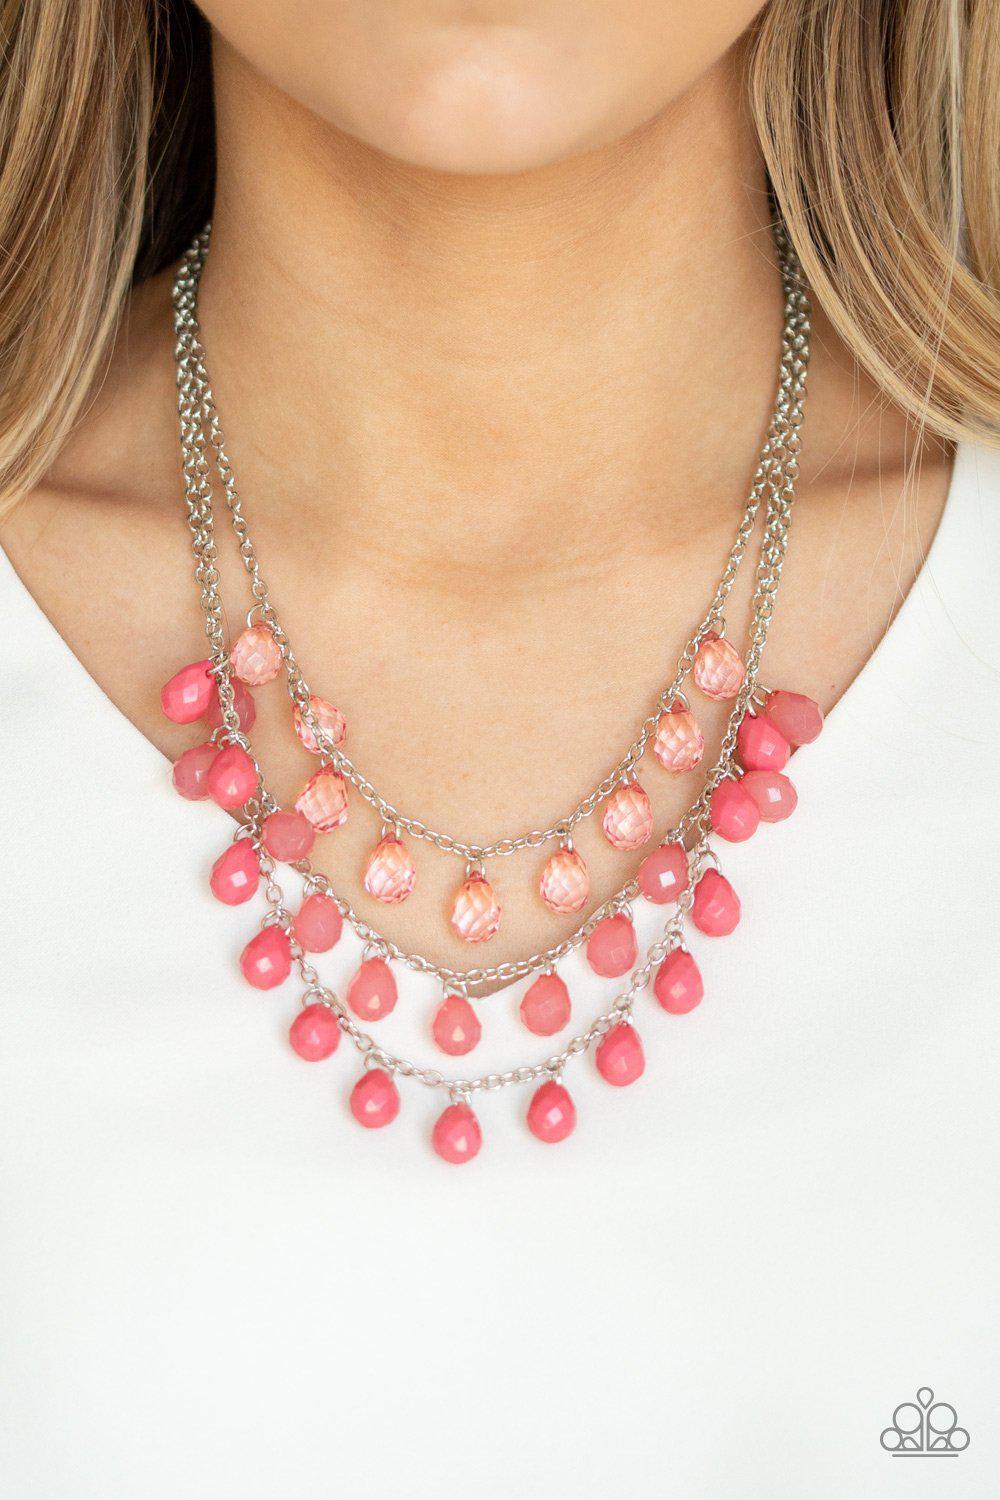 Melting Ice Caps Coral Bead Necklace - Paparazzi Accessories-CarasShop.com - $5 Jewelry by Cara Jewels